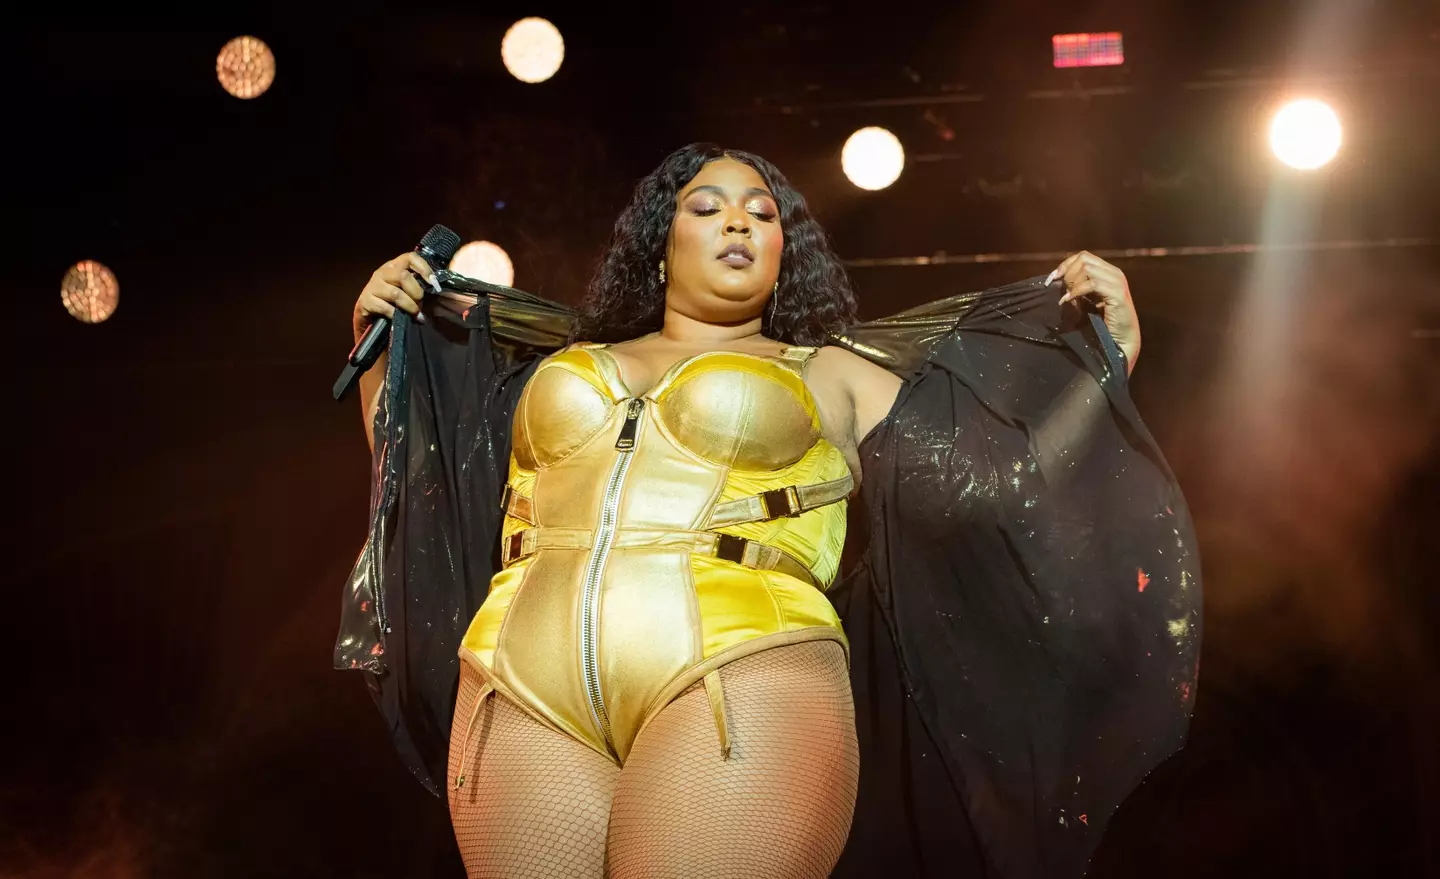 Lizzo spoke candidly about her past insecurities over her body.